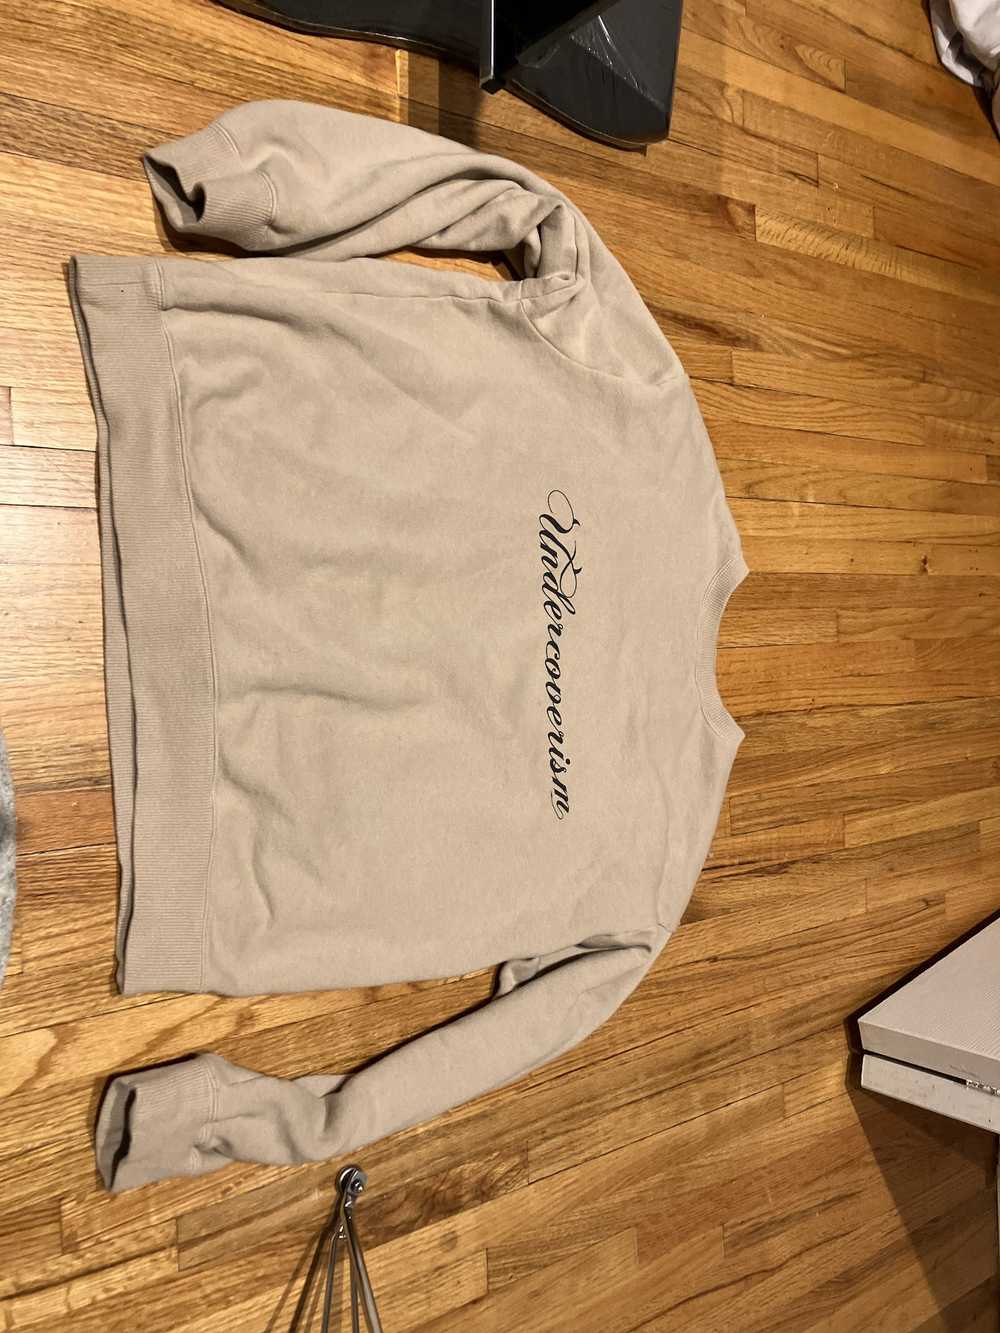 Undercover Undercoverism tan sweater - image 1